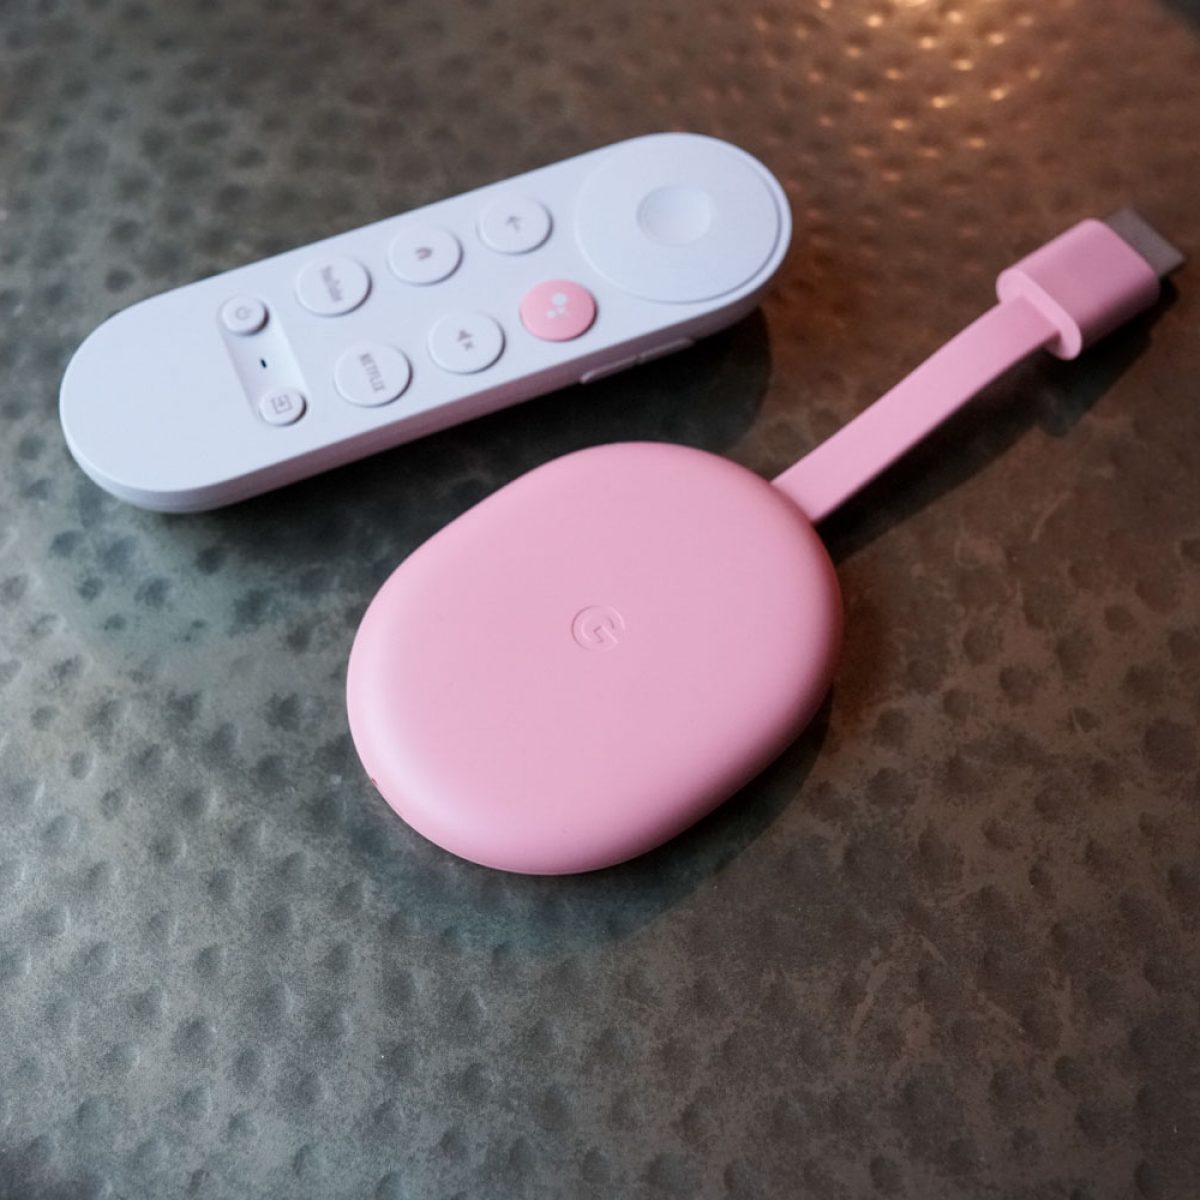 Chromecast with Google TV Review - 6 Months Later 